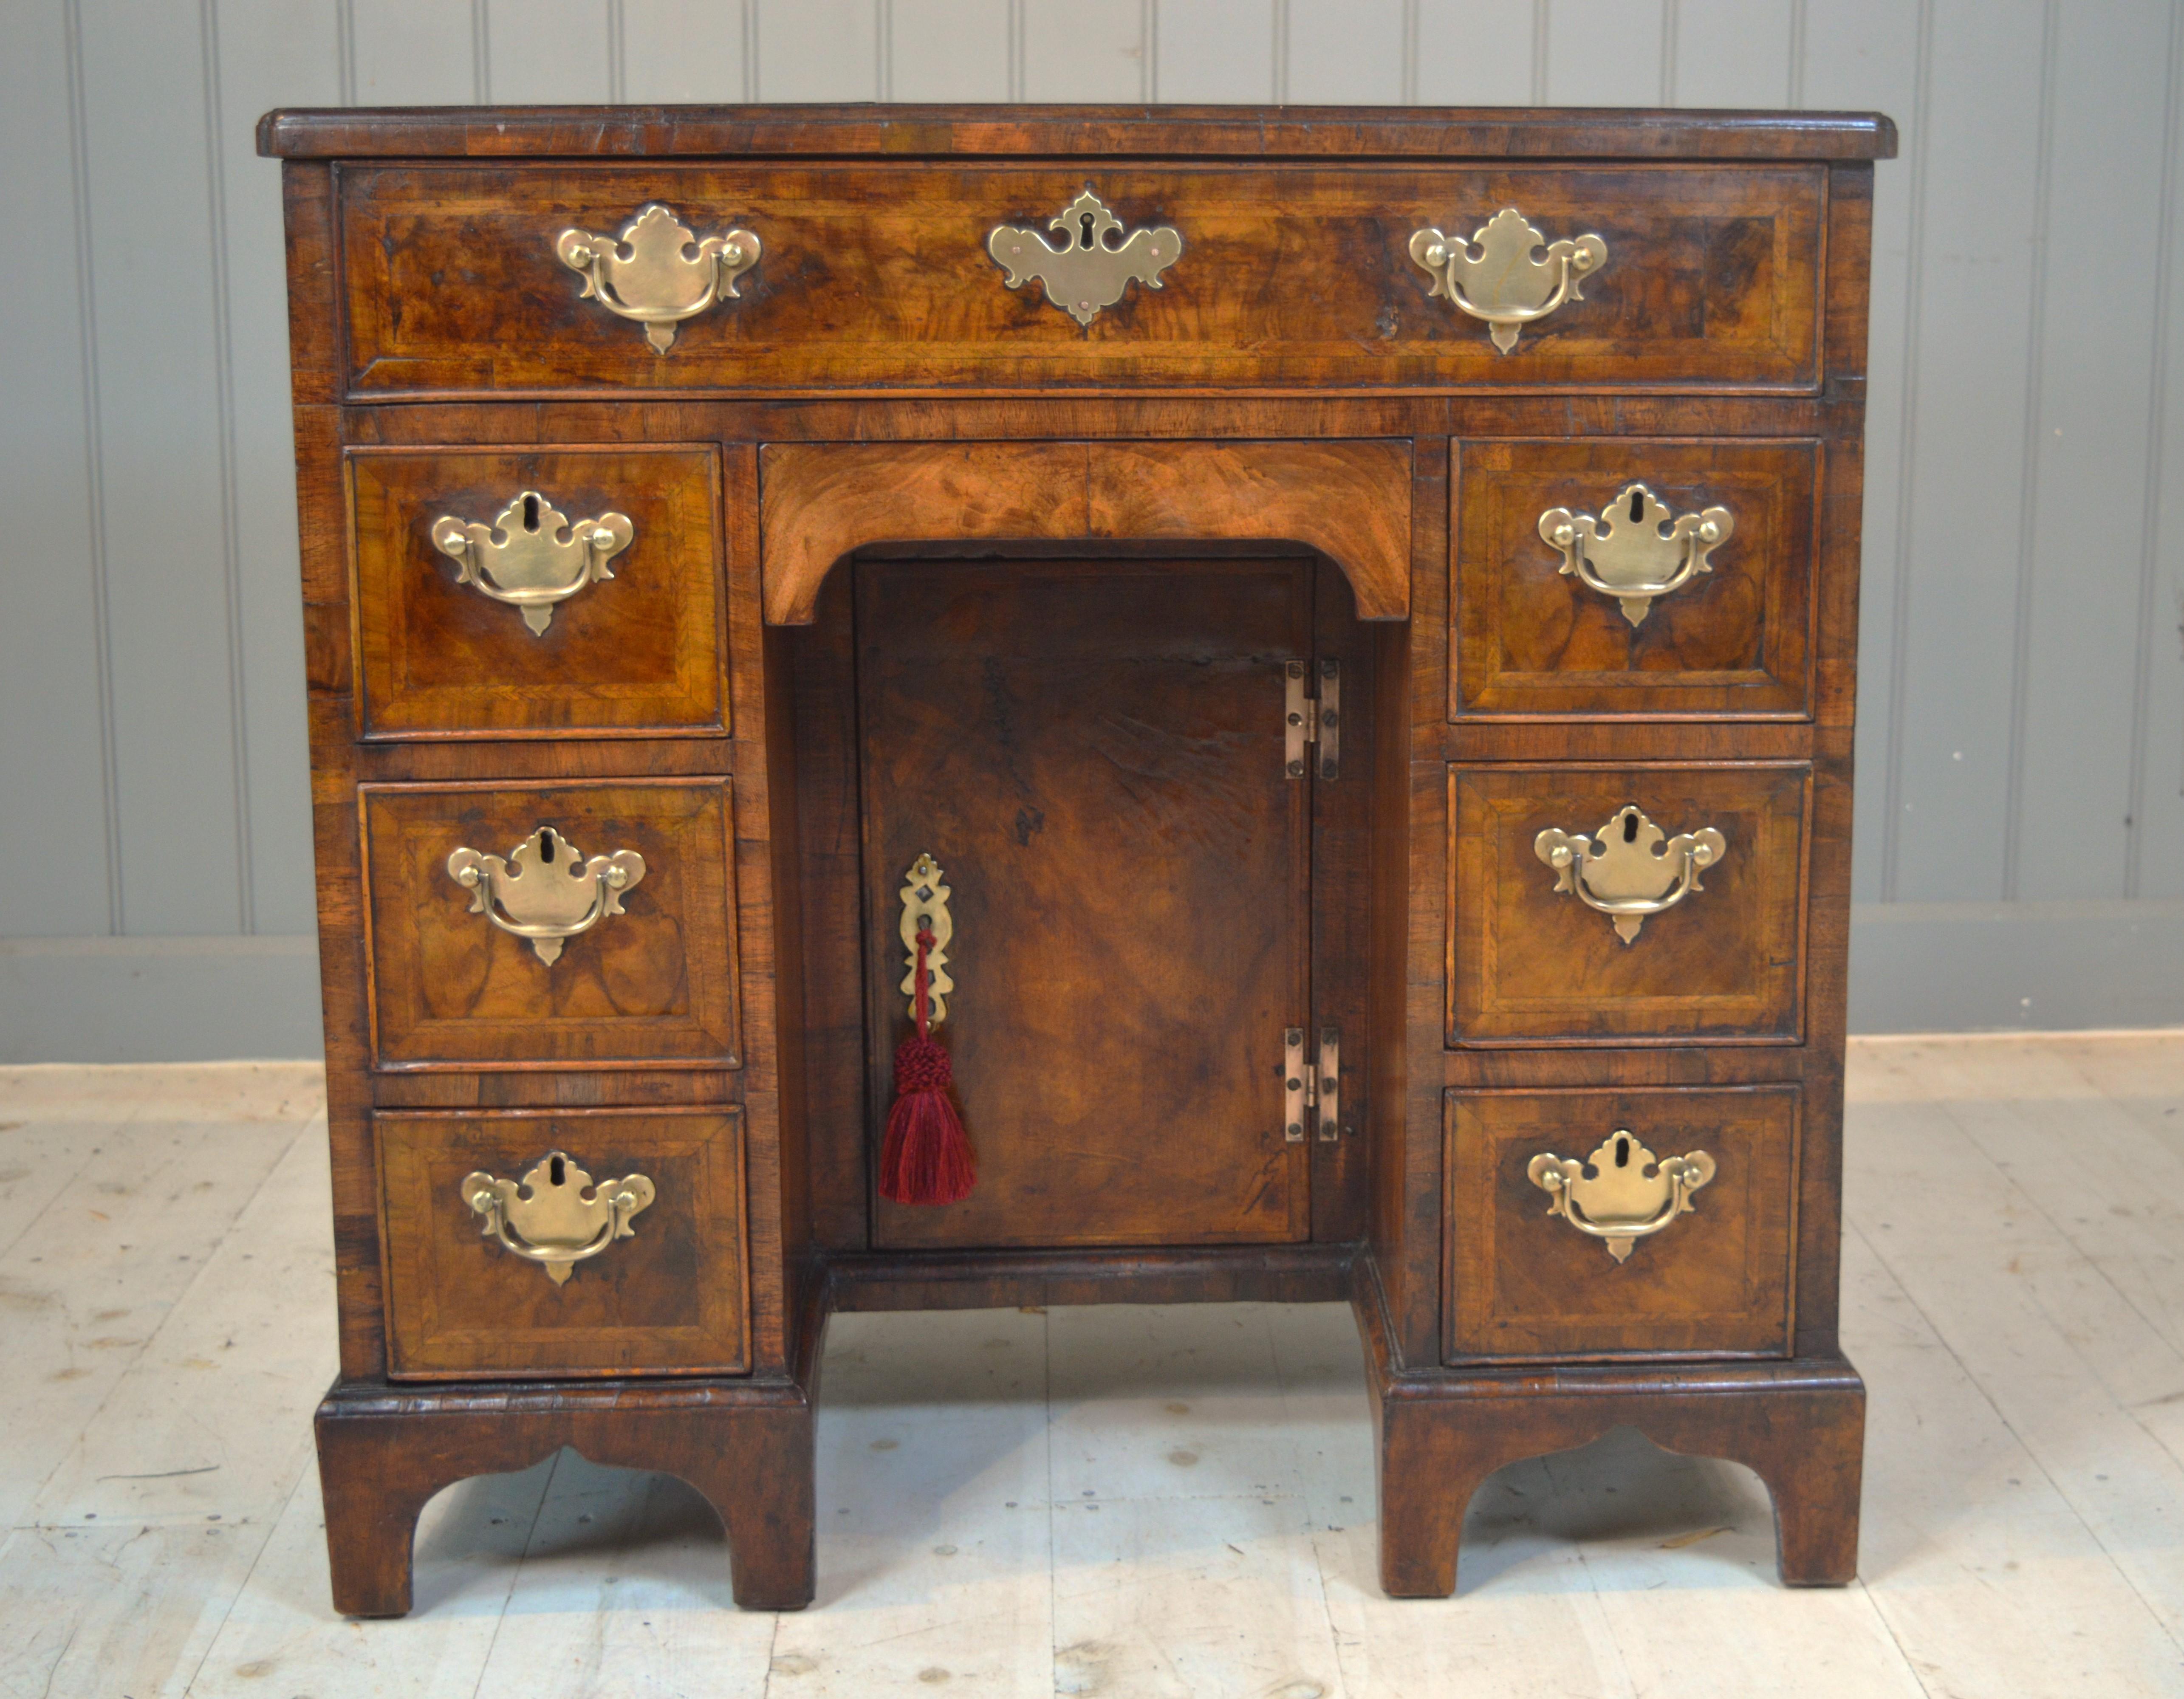 This is a really nice 18th century figured walnut Knee Hole desk .This desk has oak linings, cock beaded drawers and is sitting on bracket feet ,the veneer is well figured  and is a good colour .The top has a two piece mirrored finish veneer and re